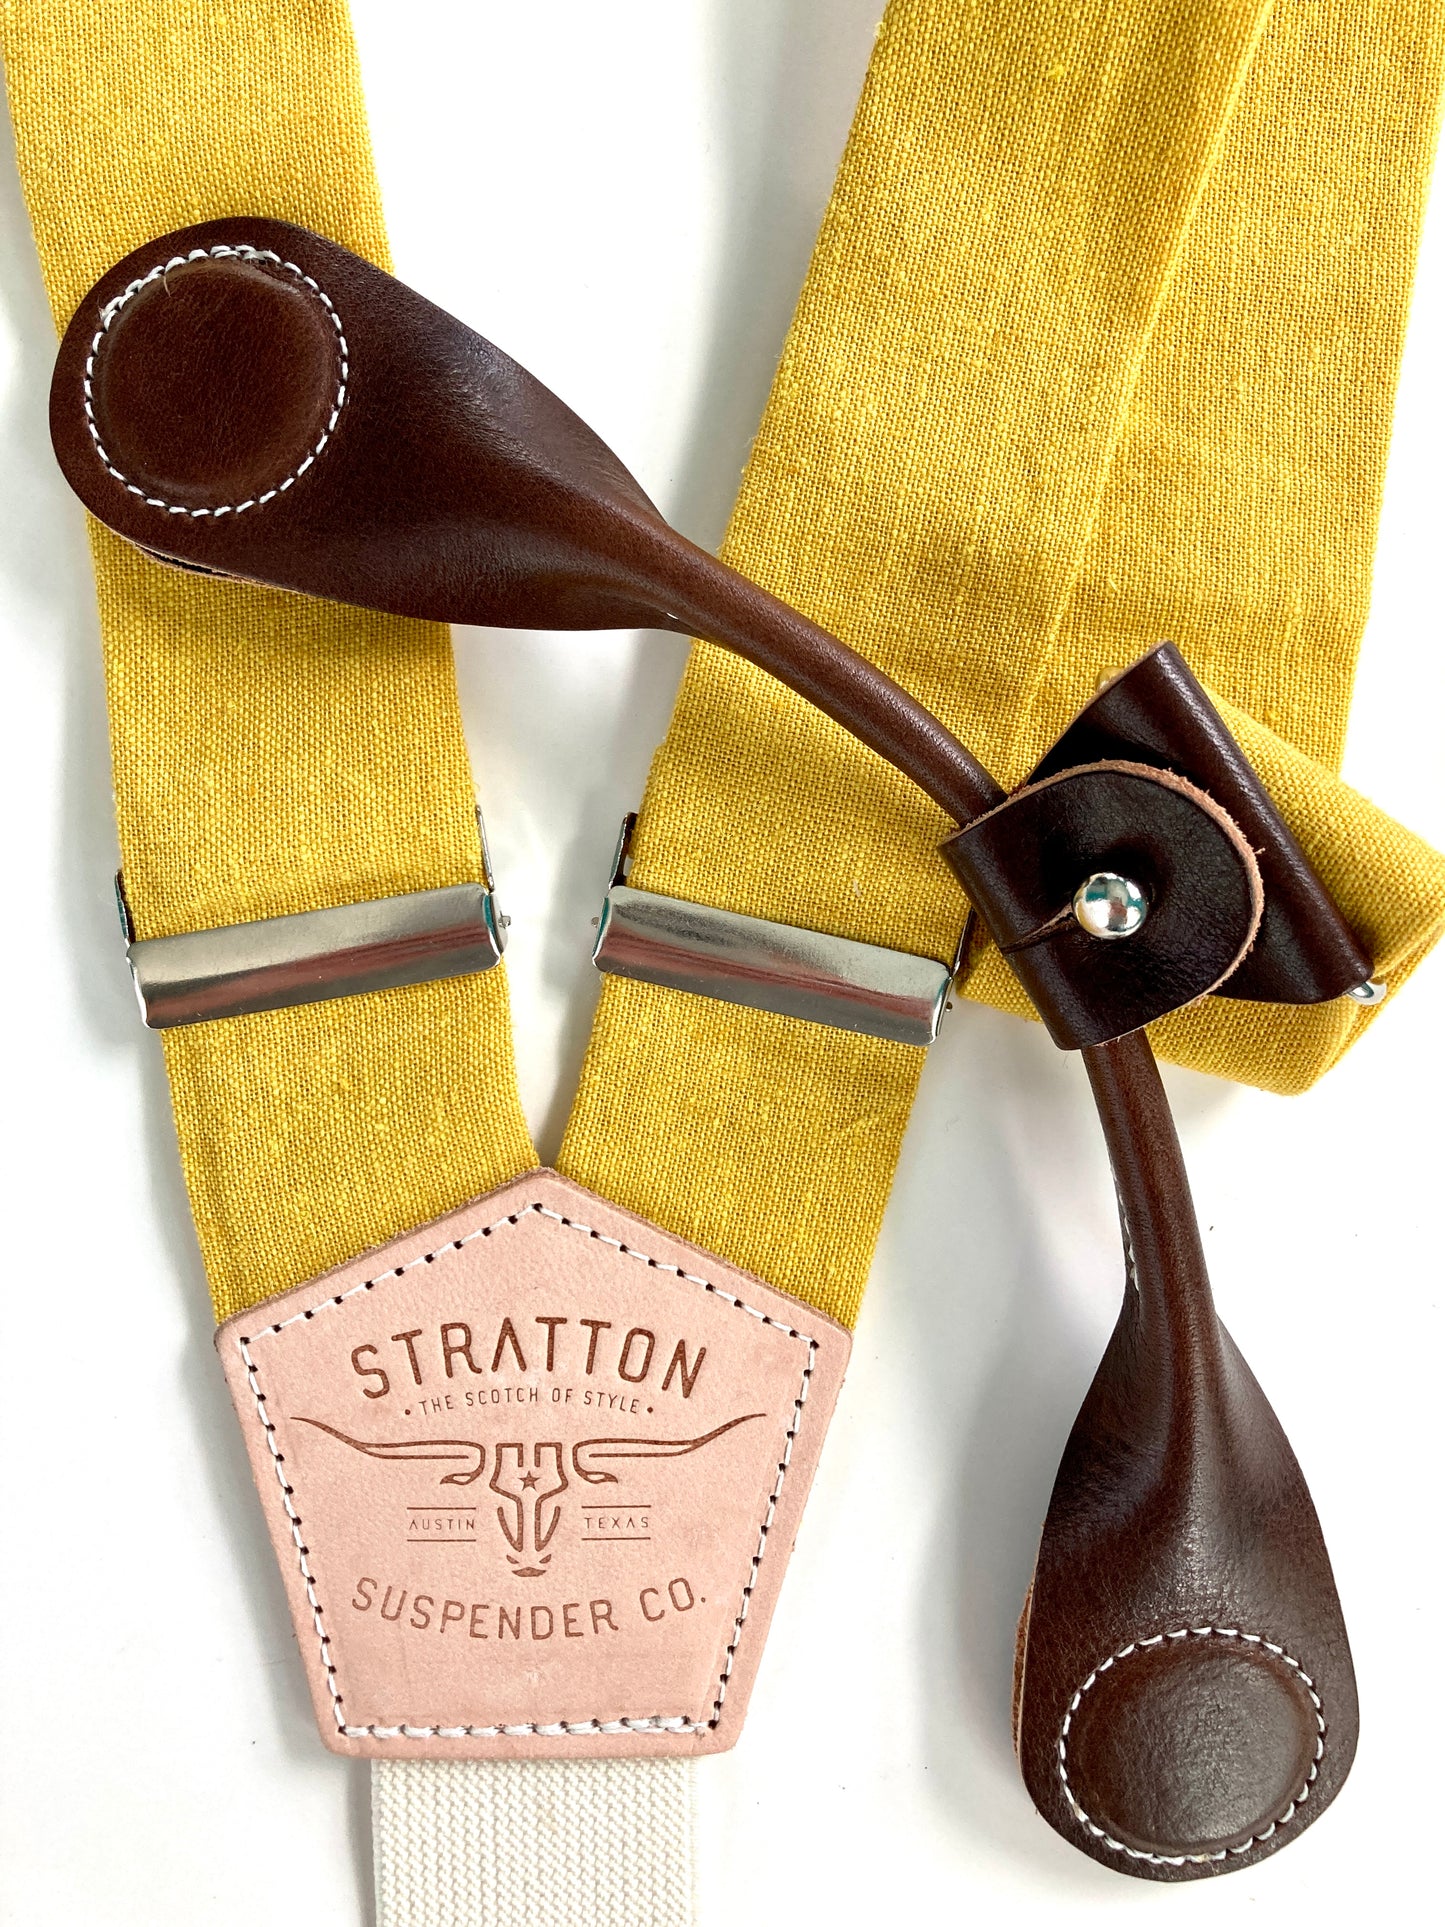 Stratton Suspender Co. features the Yellow linen suspenders on veg tan shoulder leather with cream colored elastic back strap for the Fall 2022 suspenders collection Magnetic Stratton Suspender clasps in Chocolate Pontedero Italian leather hand-picked by Stratton Suspender Co.